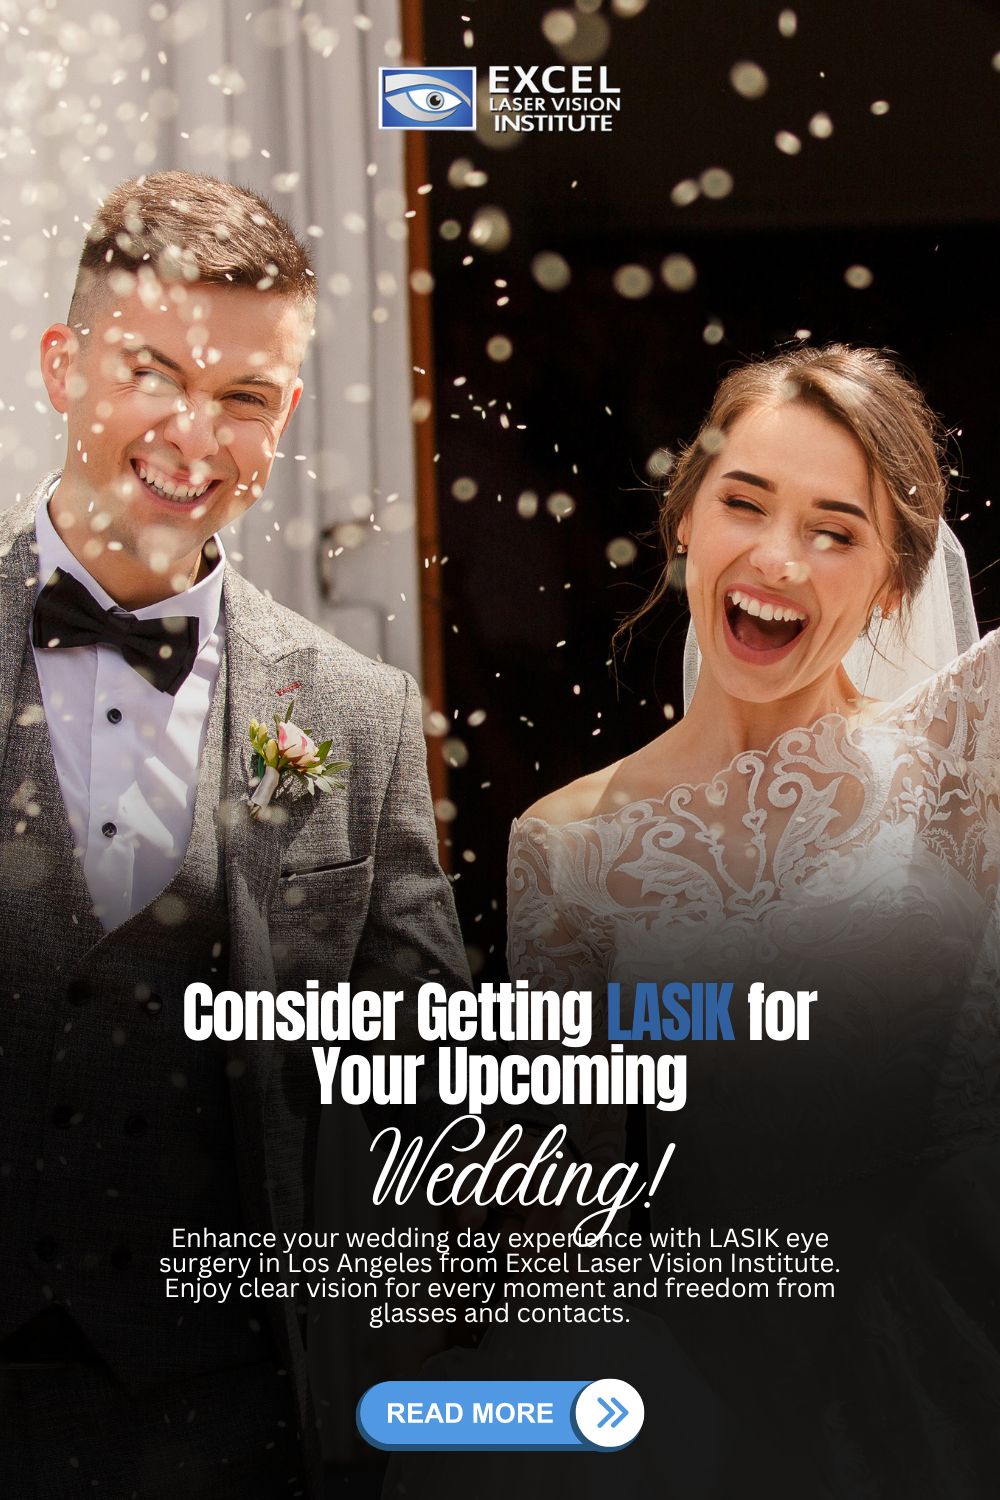 happy-couple-just-wedded-blog-title-Consider-Getting-LASIK-for-Your-Upcoming-Wedding-Pinterest-Pin